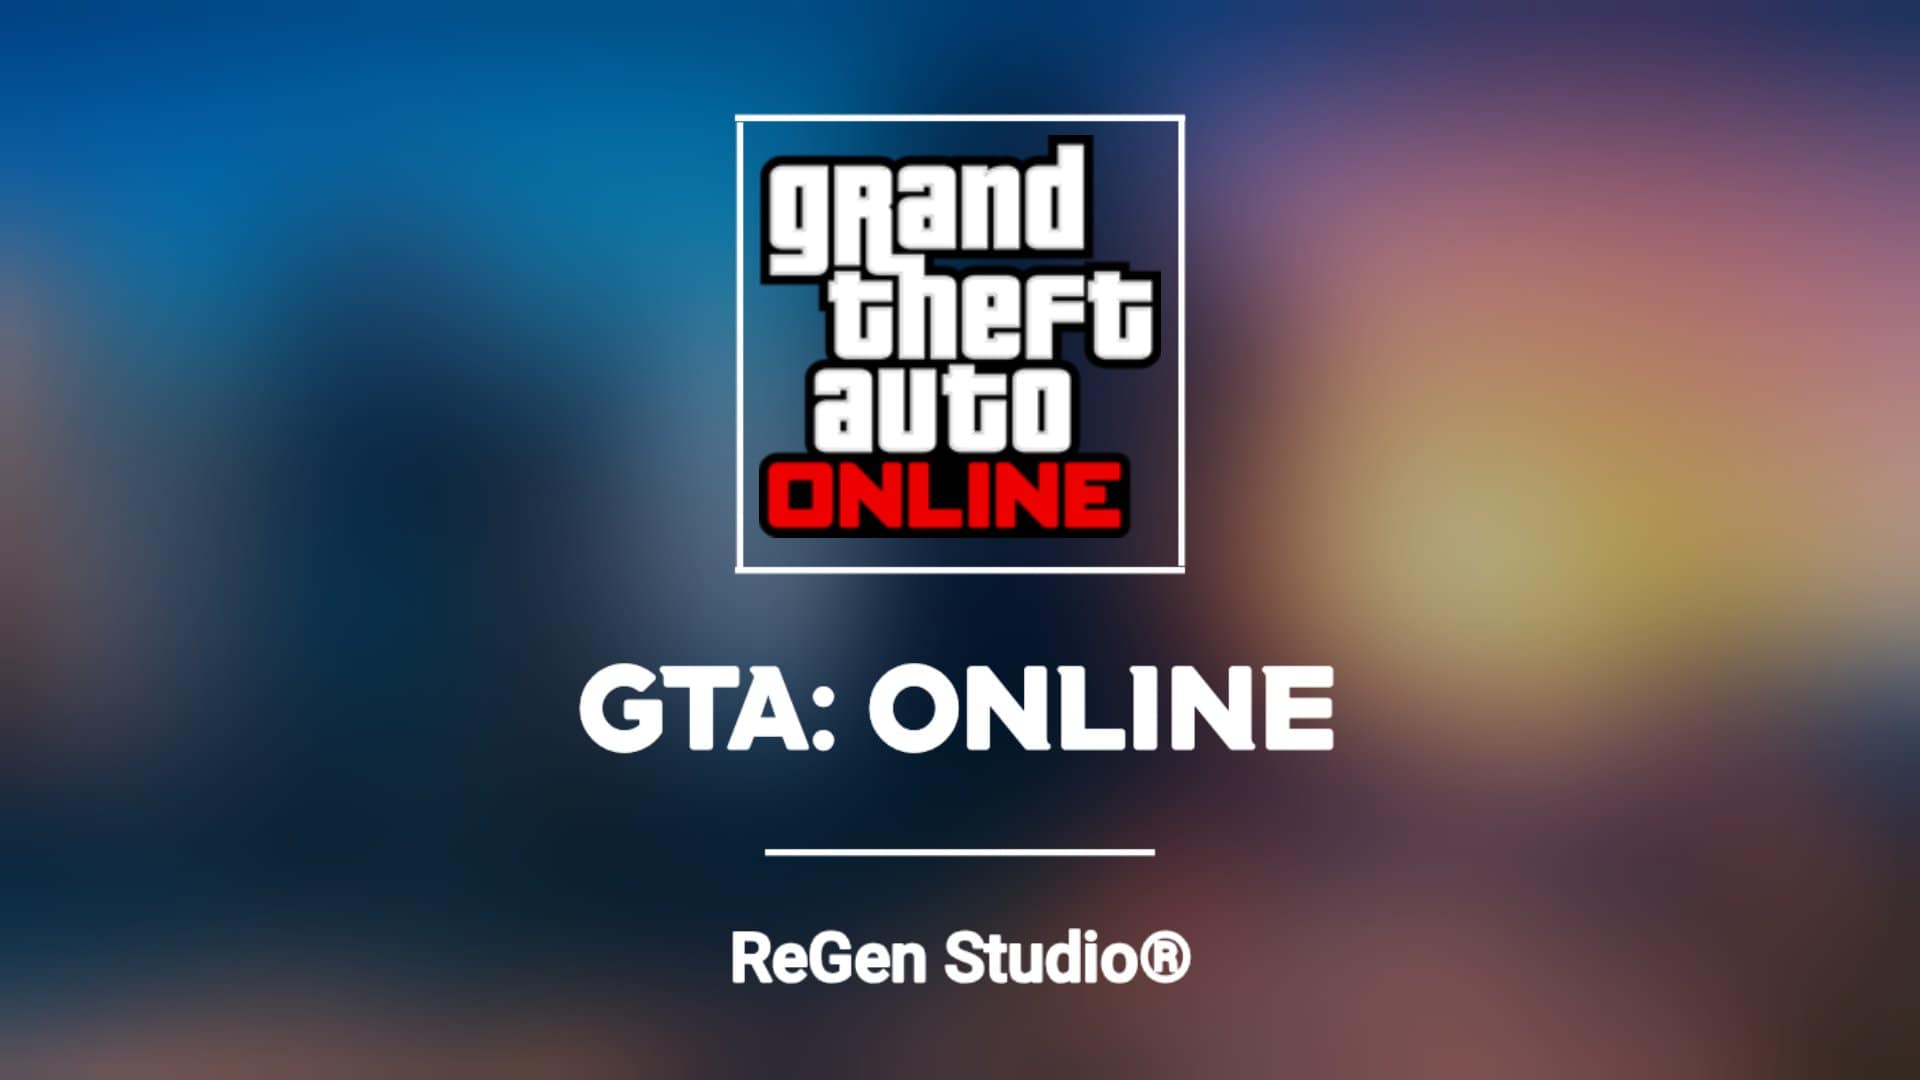 GTA 5 Online Apk Android Mobile Version Full Game Setup 2021 Free Download  - GamerSons